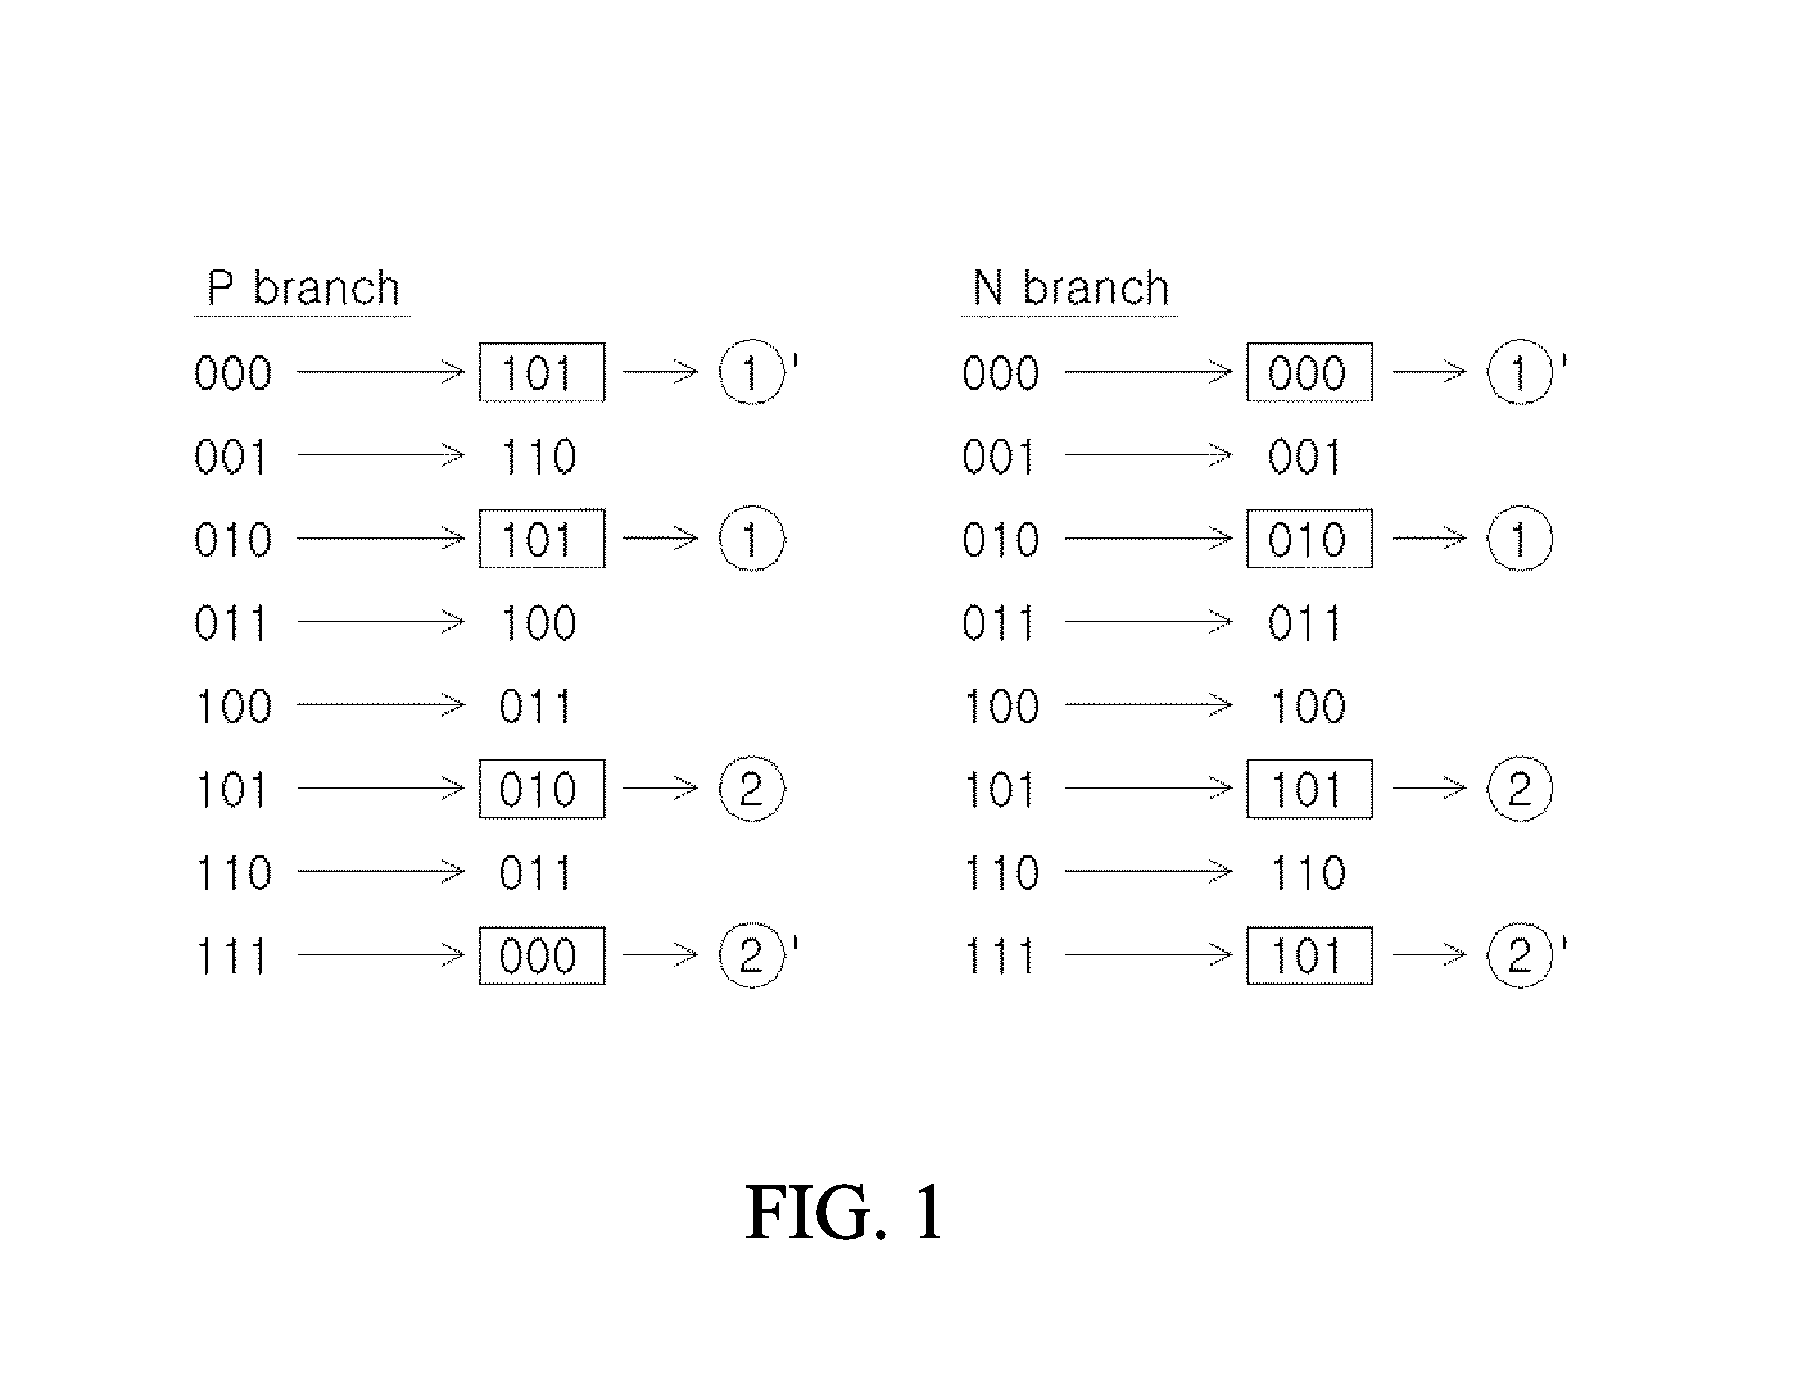 Apparatus and system for tracking data speed automatically